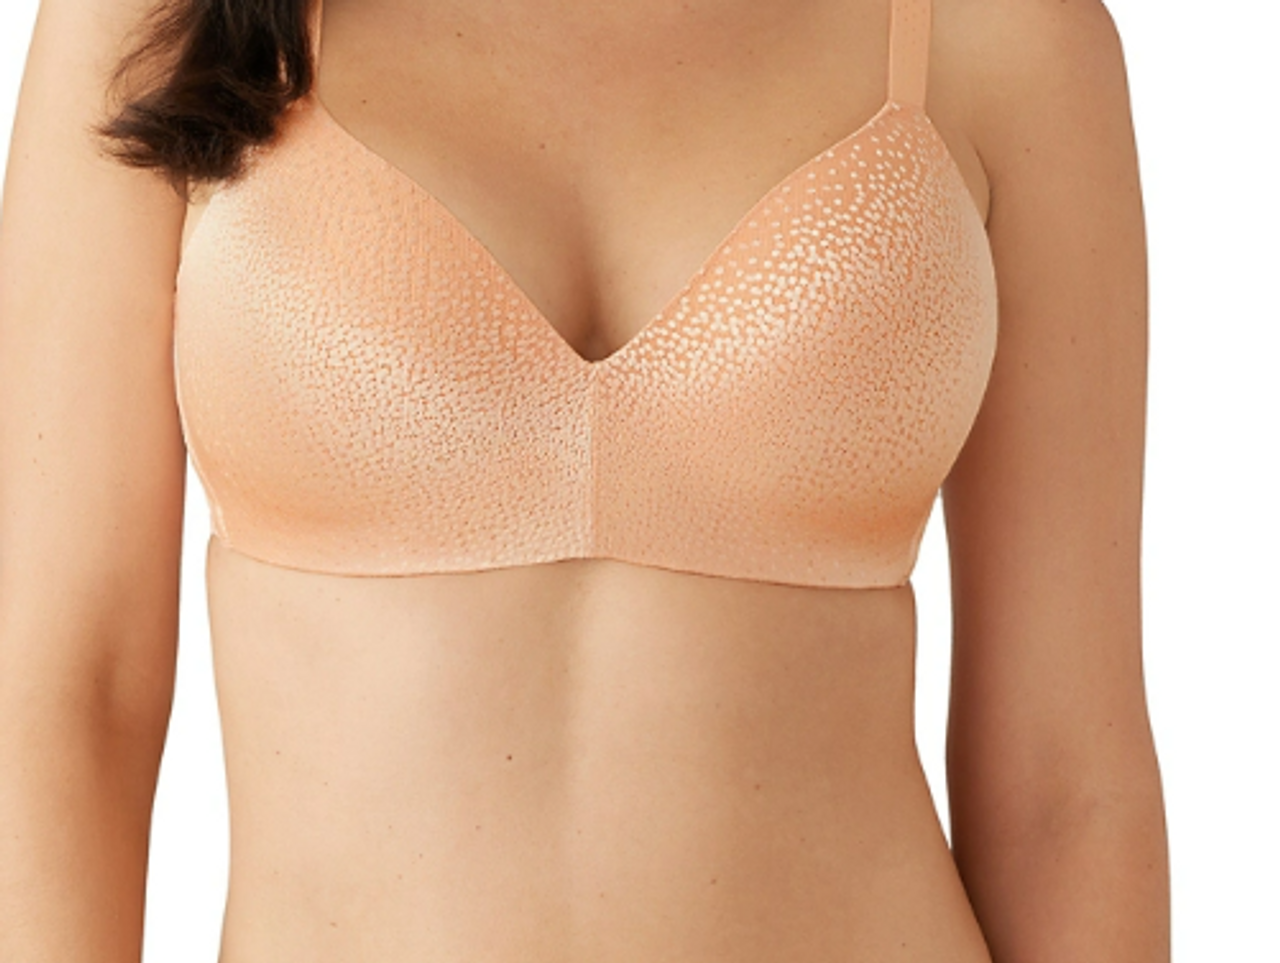 Wacoal Back Appeal Wirefree Contour Bra in Almost Apricot (839)